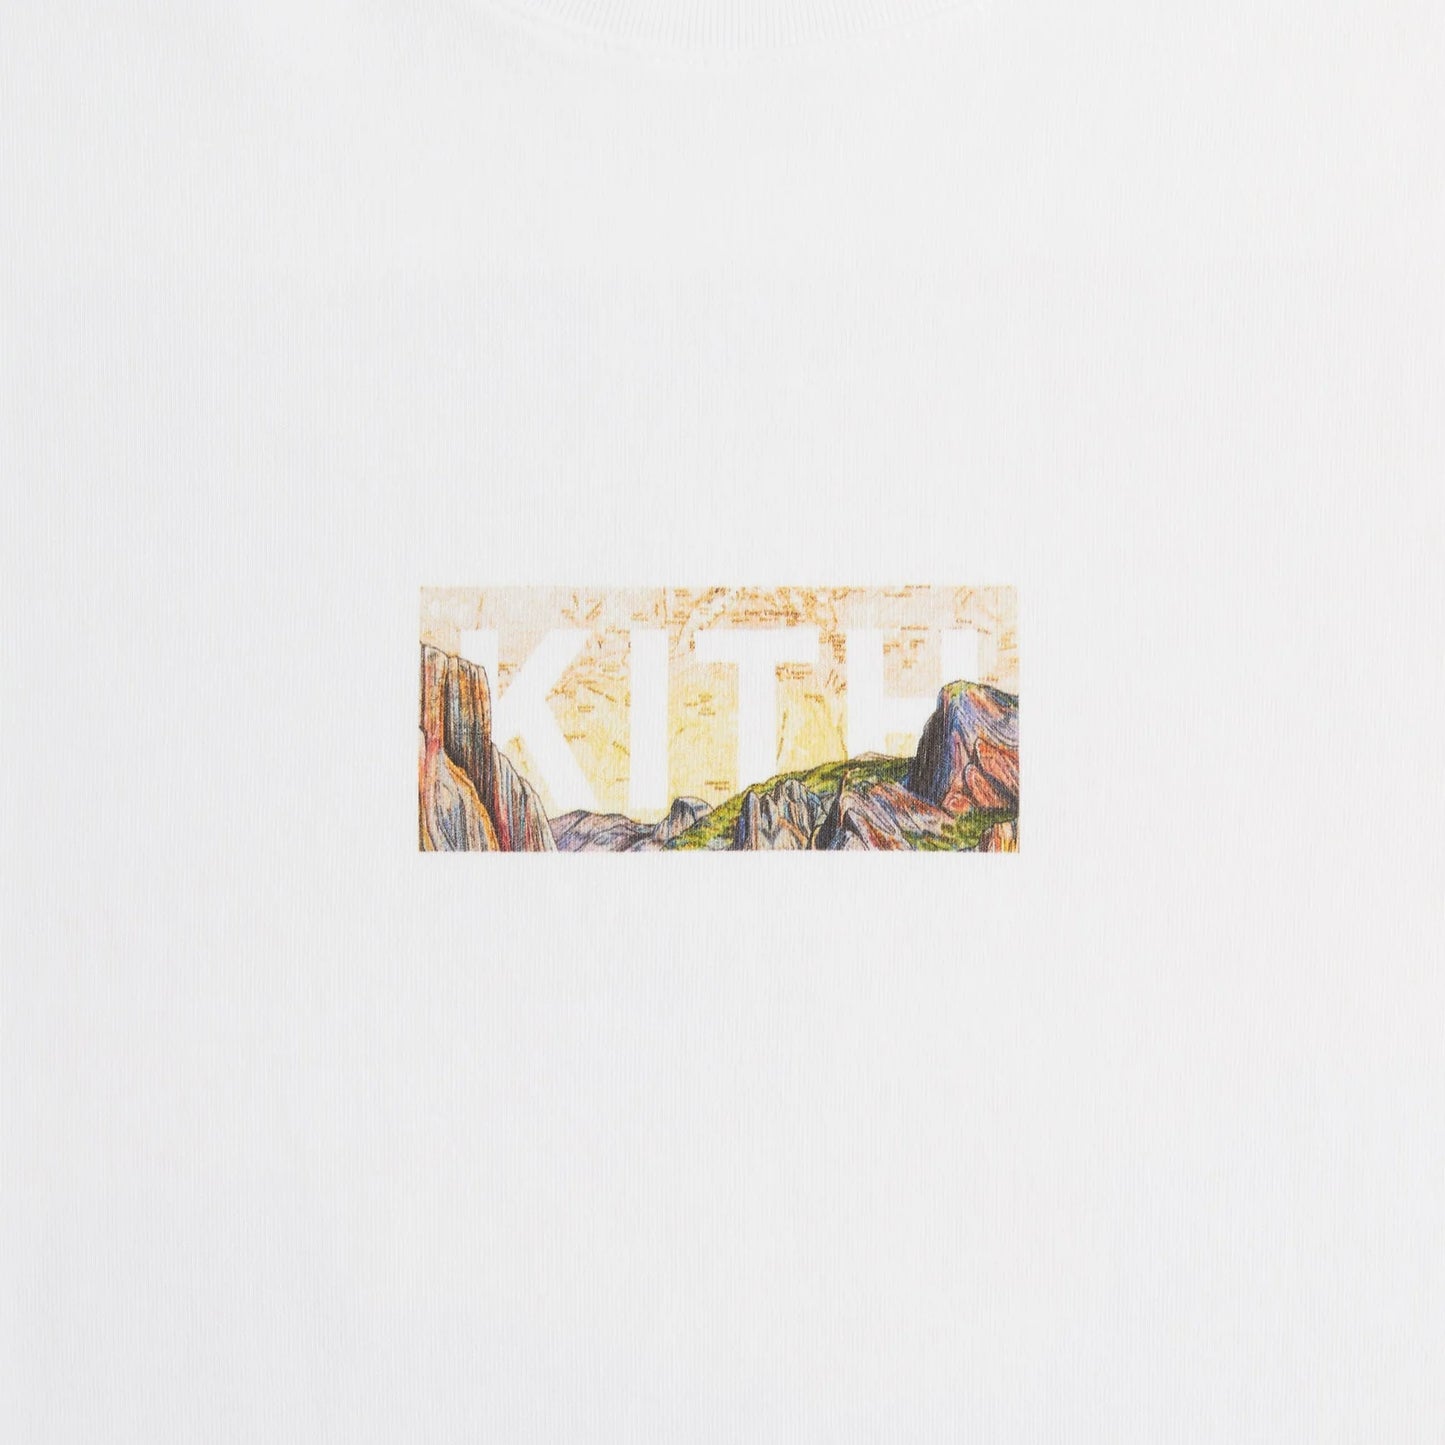 Kith x Columbia Yosemite Classic Logo Tee White by Kith from £115.00